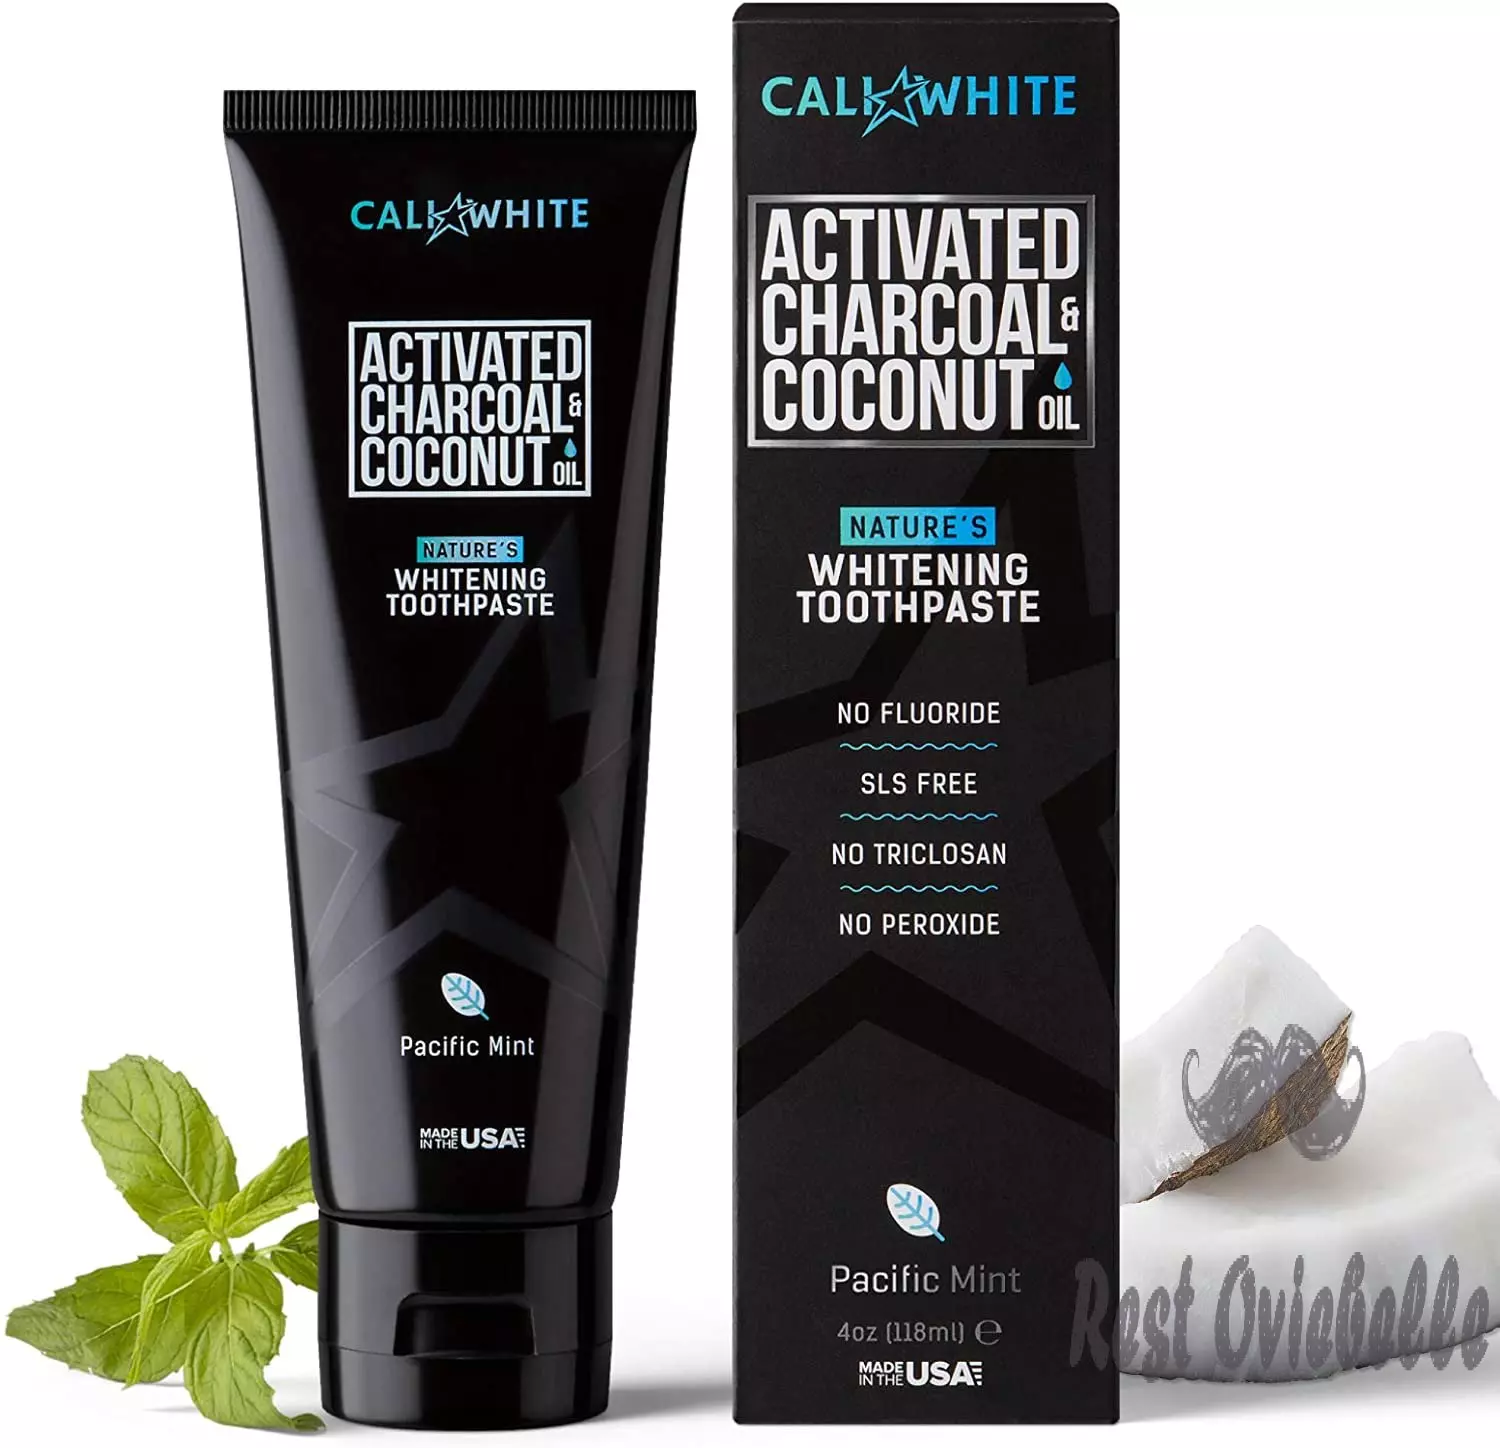 Cali White Activated Charcoal Organic Coconut Oil Teeth Whitening Toothpaste